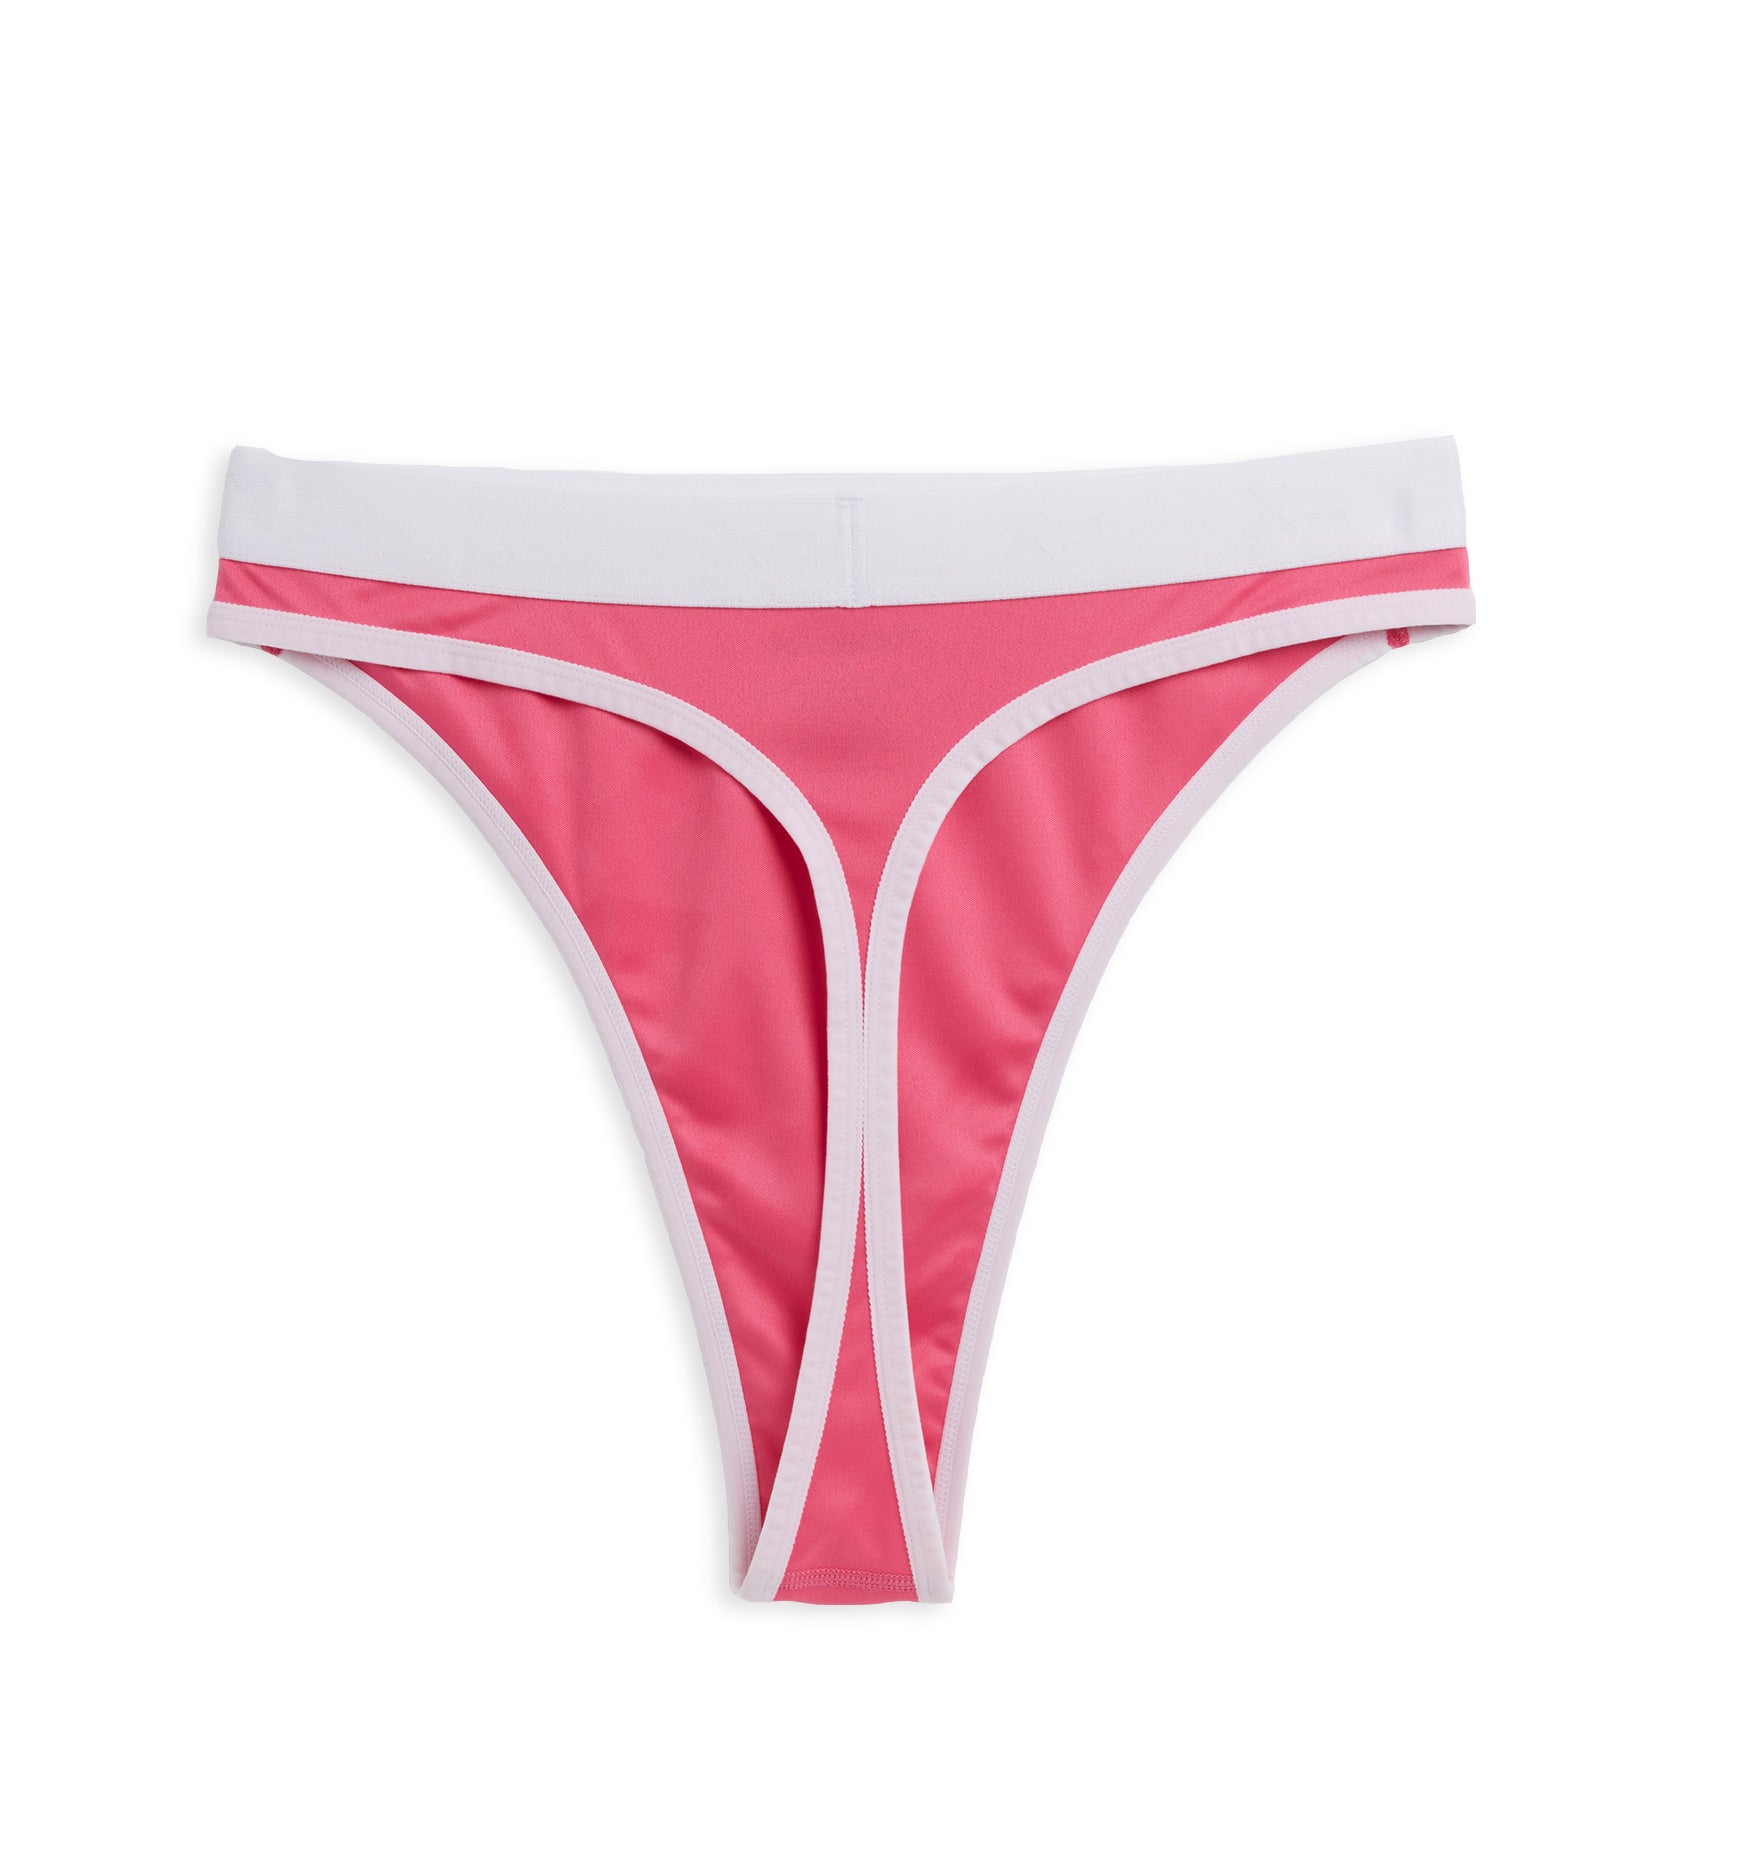 Tomboyx Tucking Hiding Bikini Underwear, Secure Compression Gaff Shaping  (xs-4x) Fiery Red Small : Target